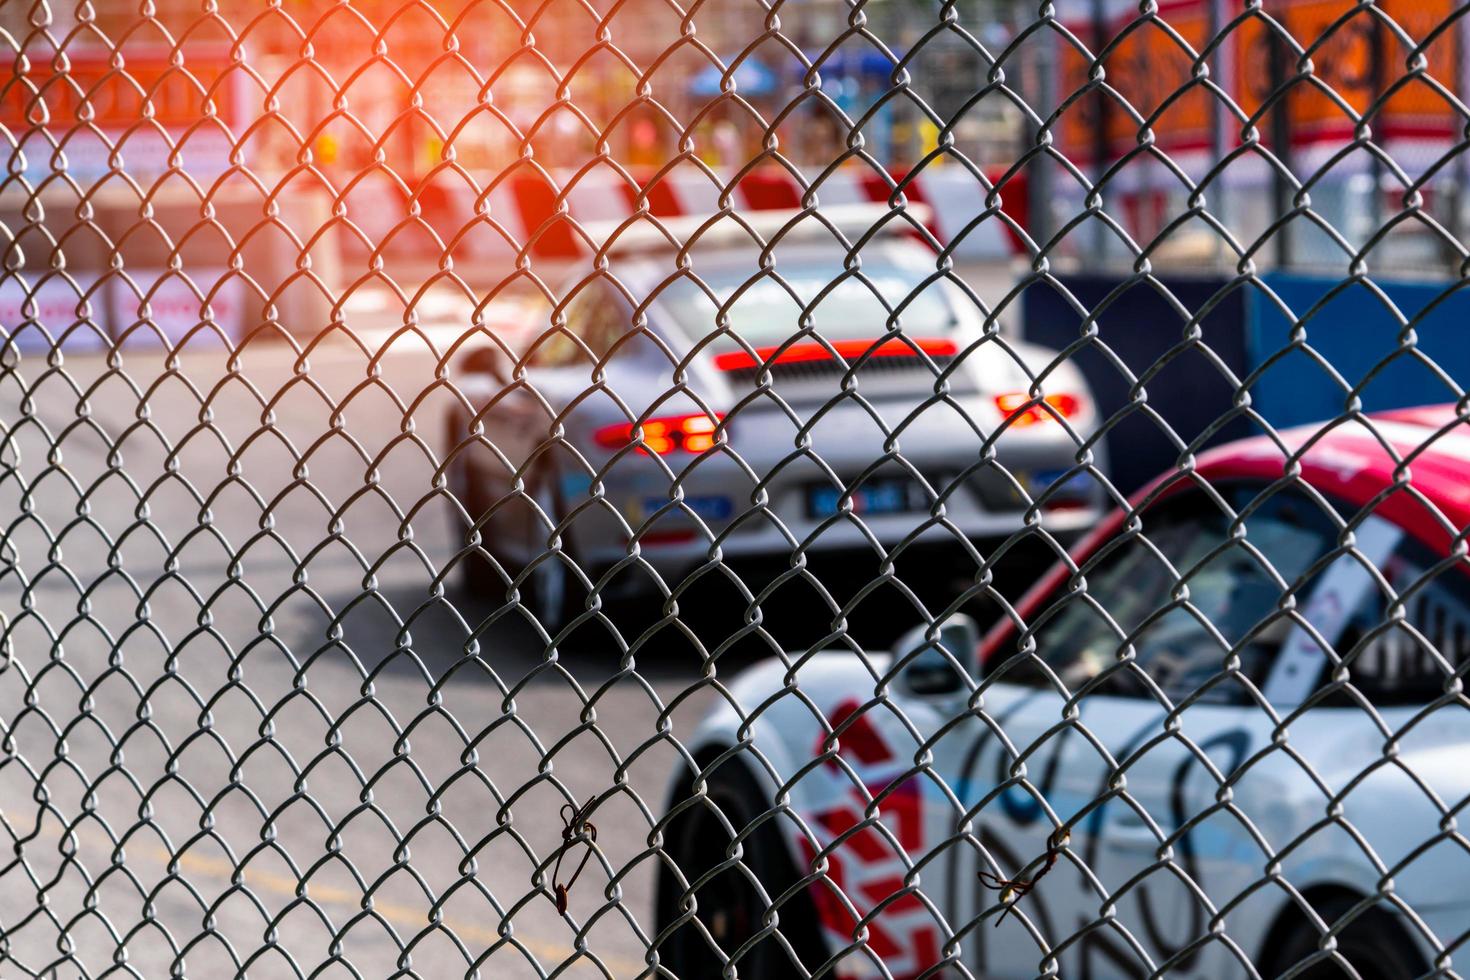 Motorsport car racing on asphalt road. View from the fence mesh netting on blurred car on racetrack background. Super racing car on street circuit. Automotive industry concept. photo